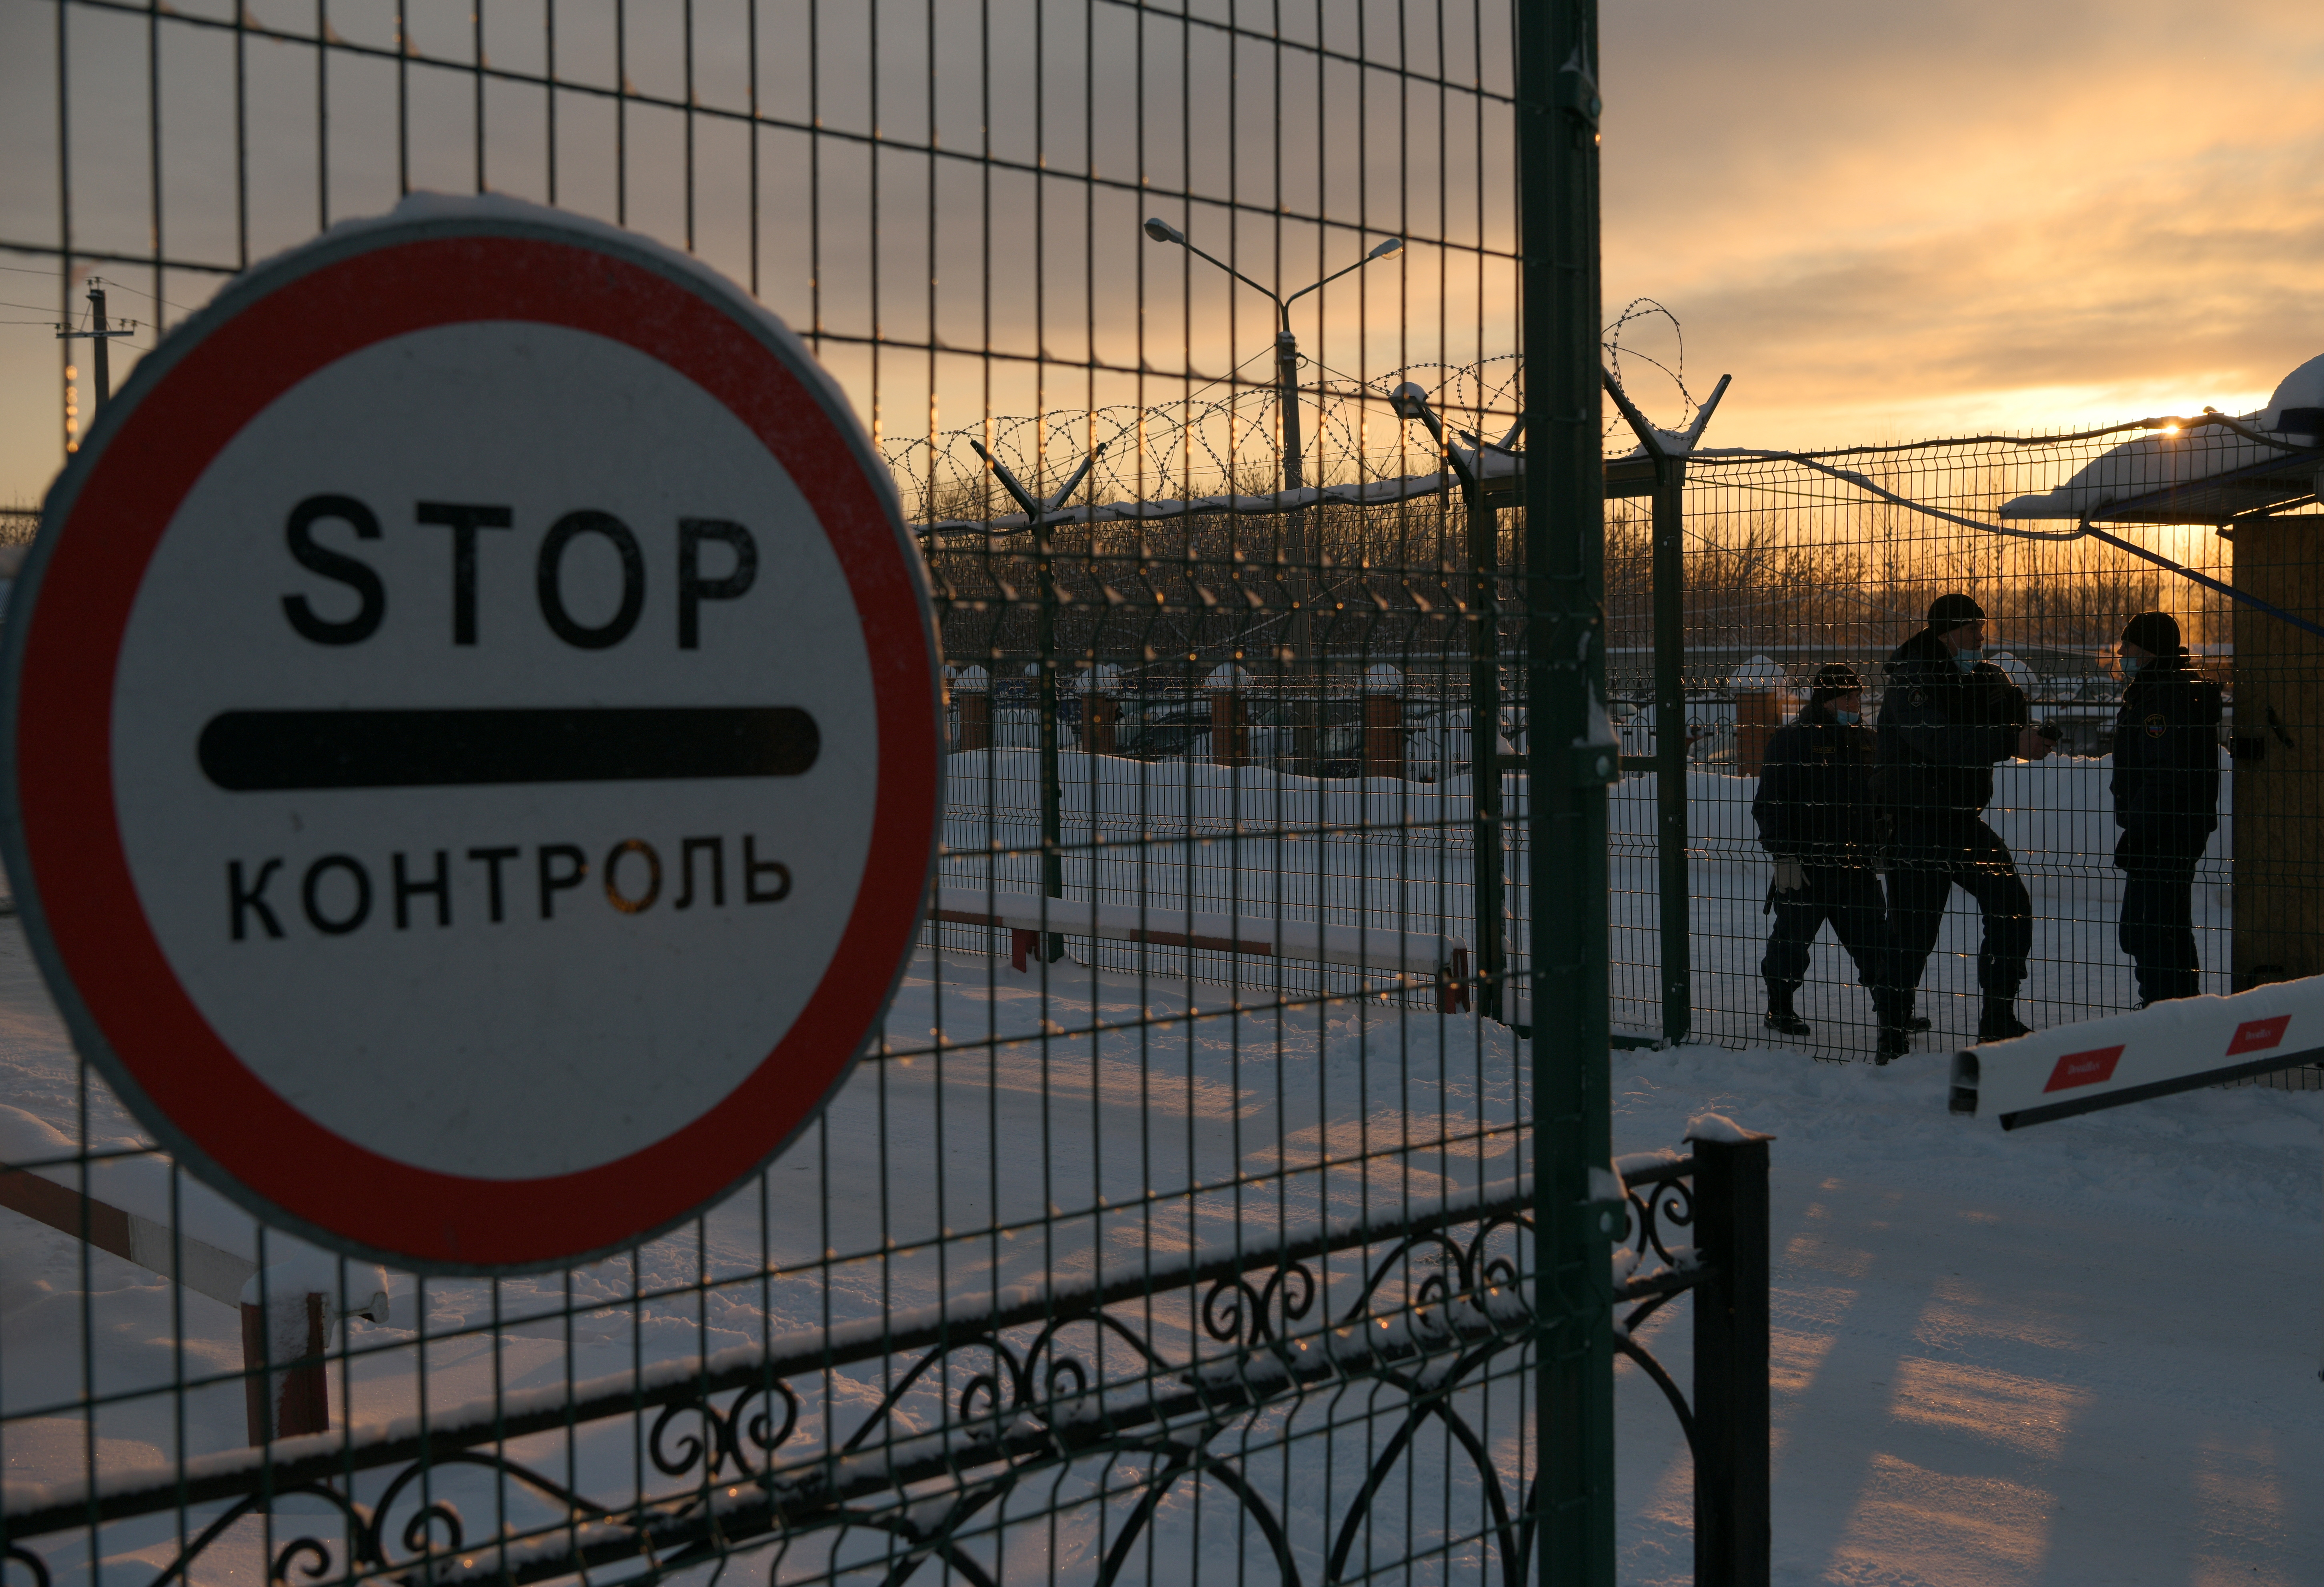 A stop sign is seen at the entrance into the territory of the Listvyazhnaya coal mine in the Kemerovo region